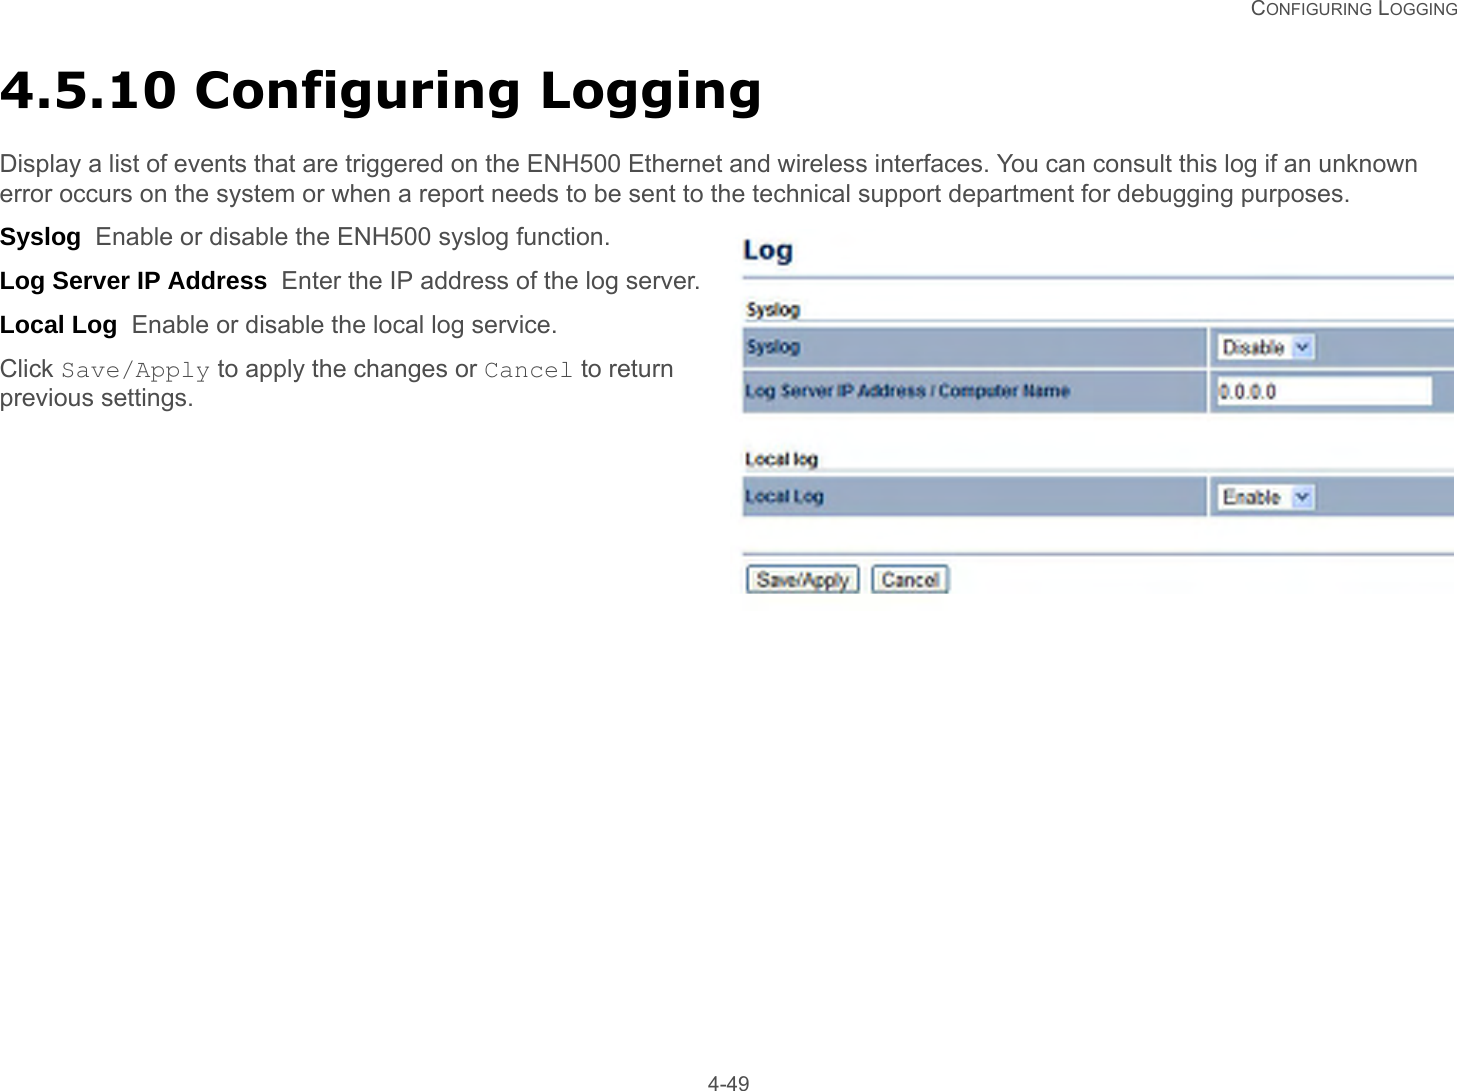   CONFIGURING LOGGING 4-494.5.10 Configuring LoggingDisplay a list of events that are triggered on the ENH500 Ethernet and wireless interfaces. You can consult this log if an unknown error occurs on the system or when a report needs to be sent to the technical support department for debugging purposes.Syslog  Enable or disable the ENH500 syslog function.Log Server IP Address  Enter the IP address of the log server.Local Log  Enable or disable the local log service.Click Save/Apply to apply the changes or Cancel to return previous settings.